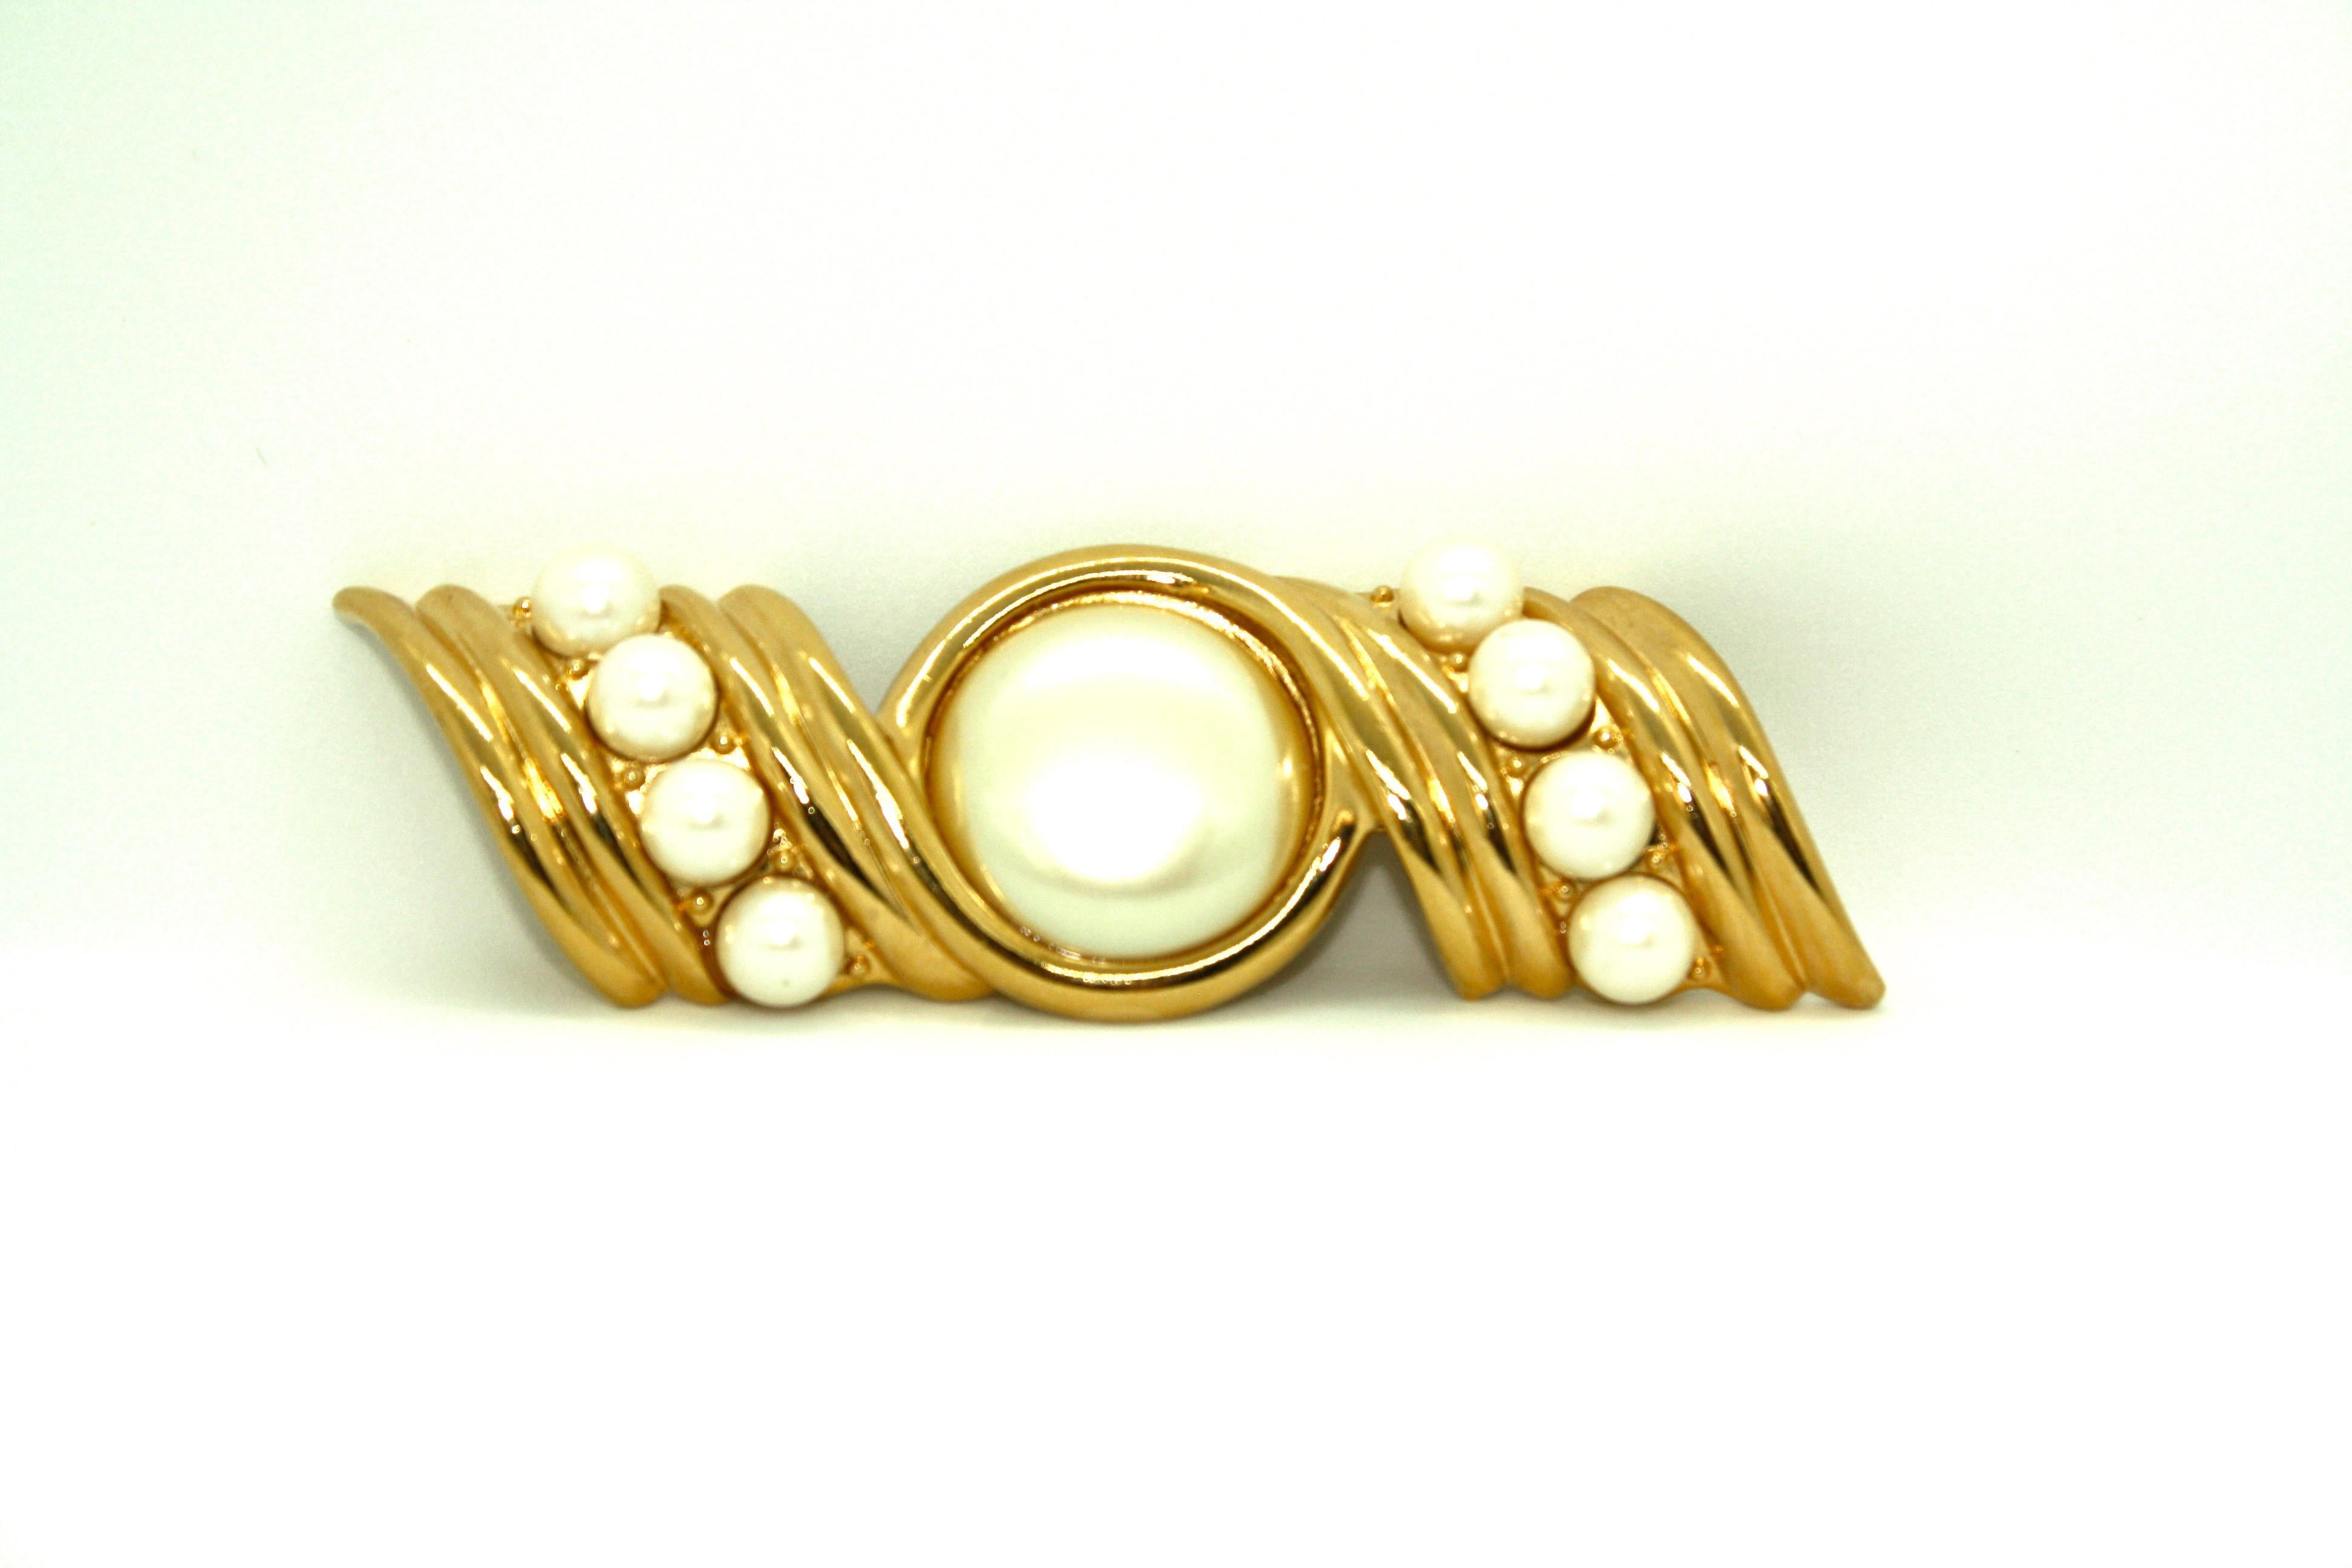 Huge statement brooch from the 1980's by Yves St Laurent, featuring a mix of pearls and textured gold plated metal. The reverse of the brooch features the YSL logo and also features the 'Radiant' back, introduced to YSL jewellery made by American